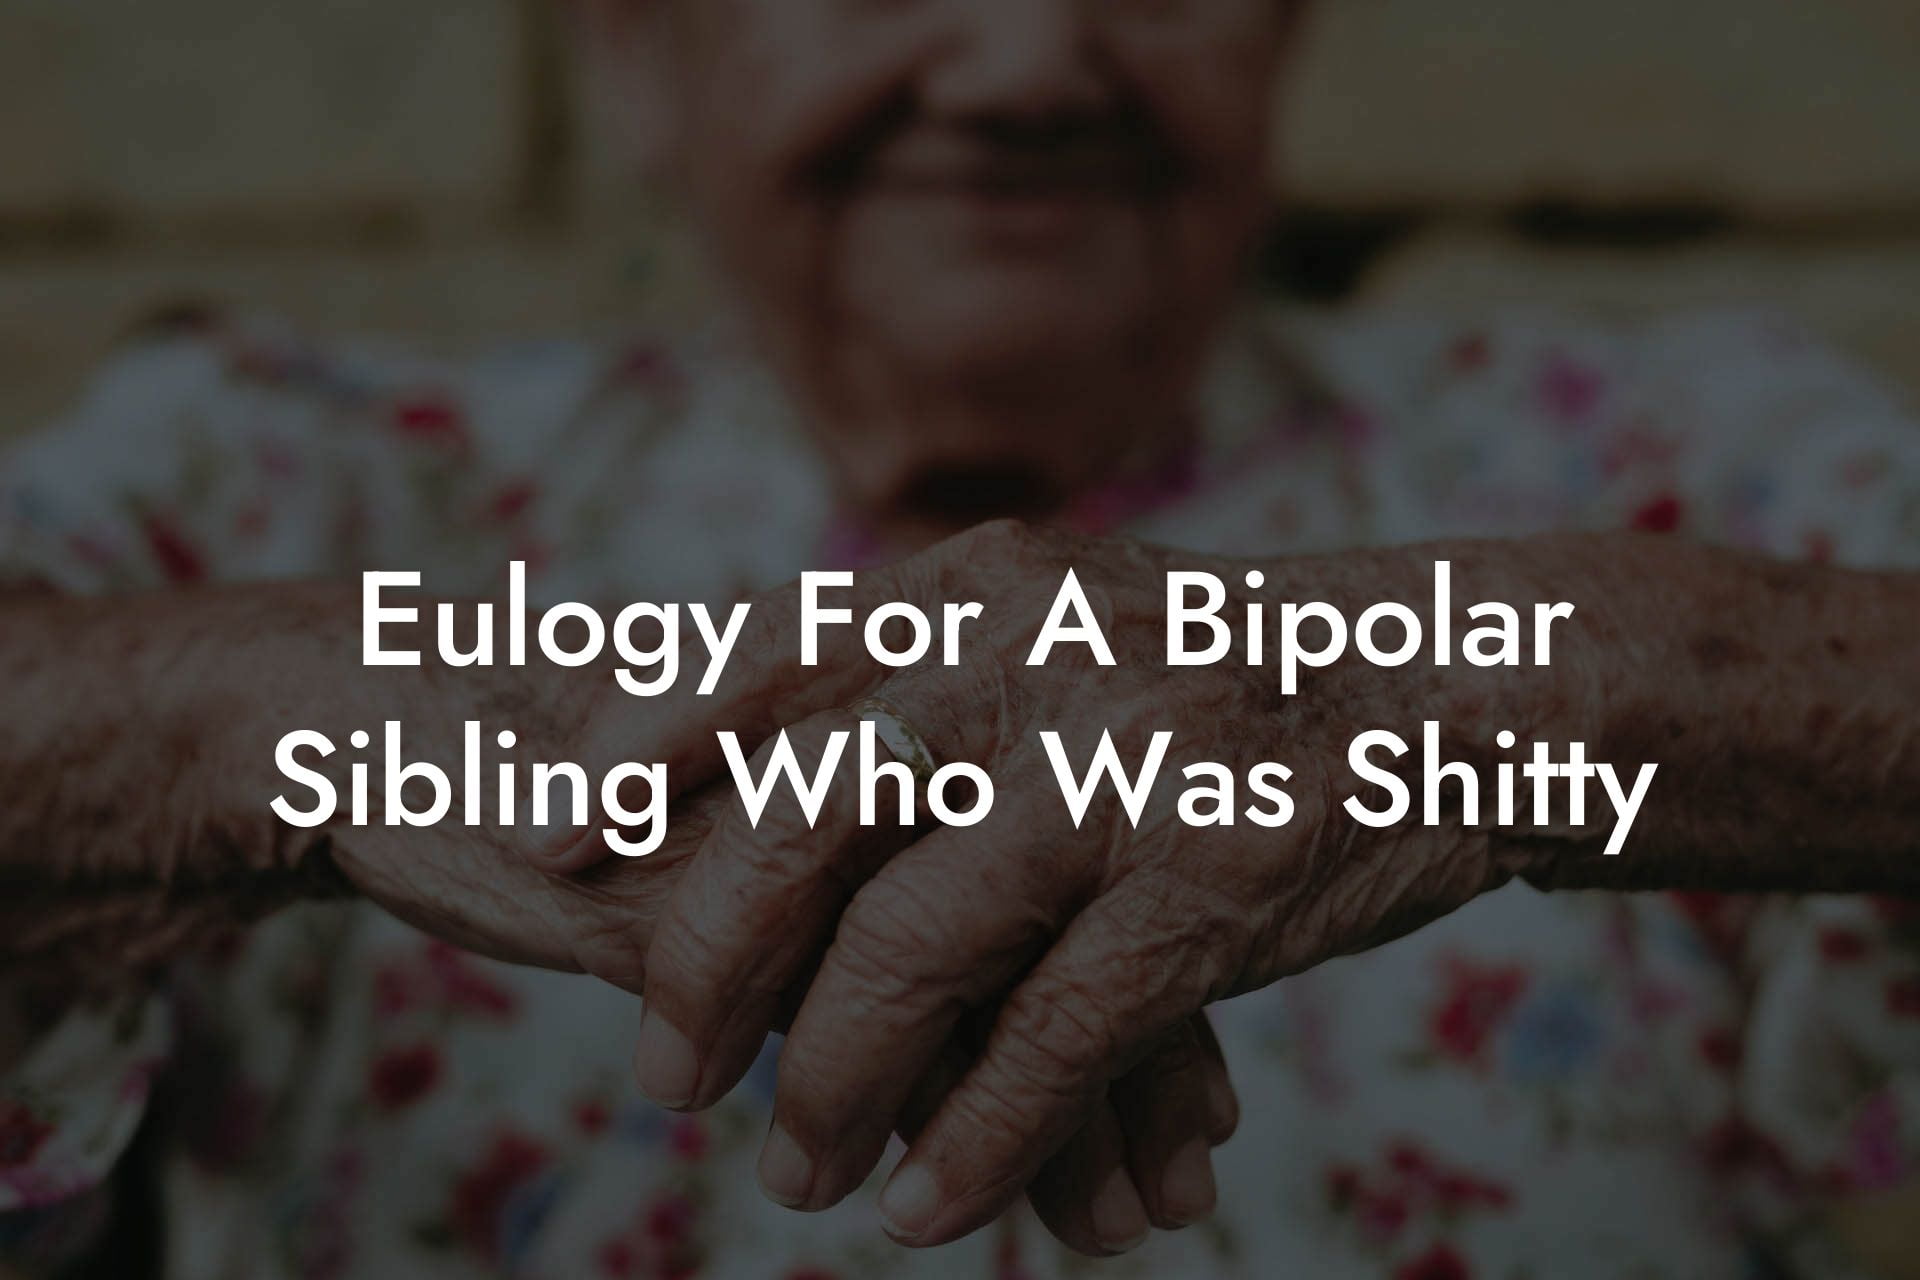 Eulogy For A Bipolar Sibling Who Was Shitty